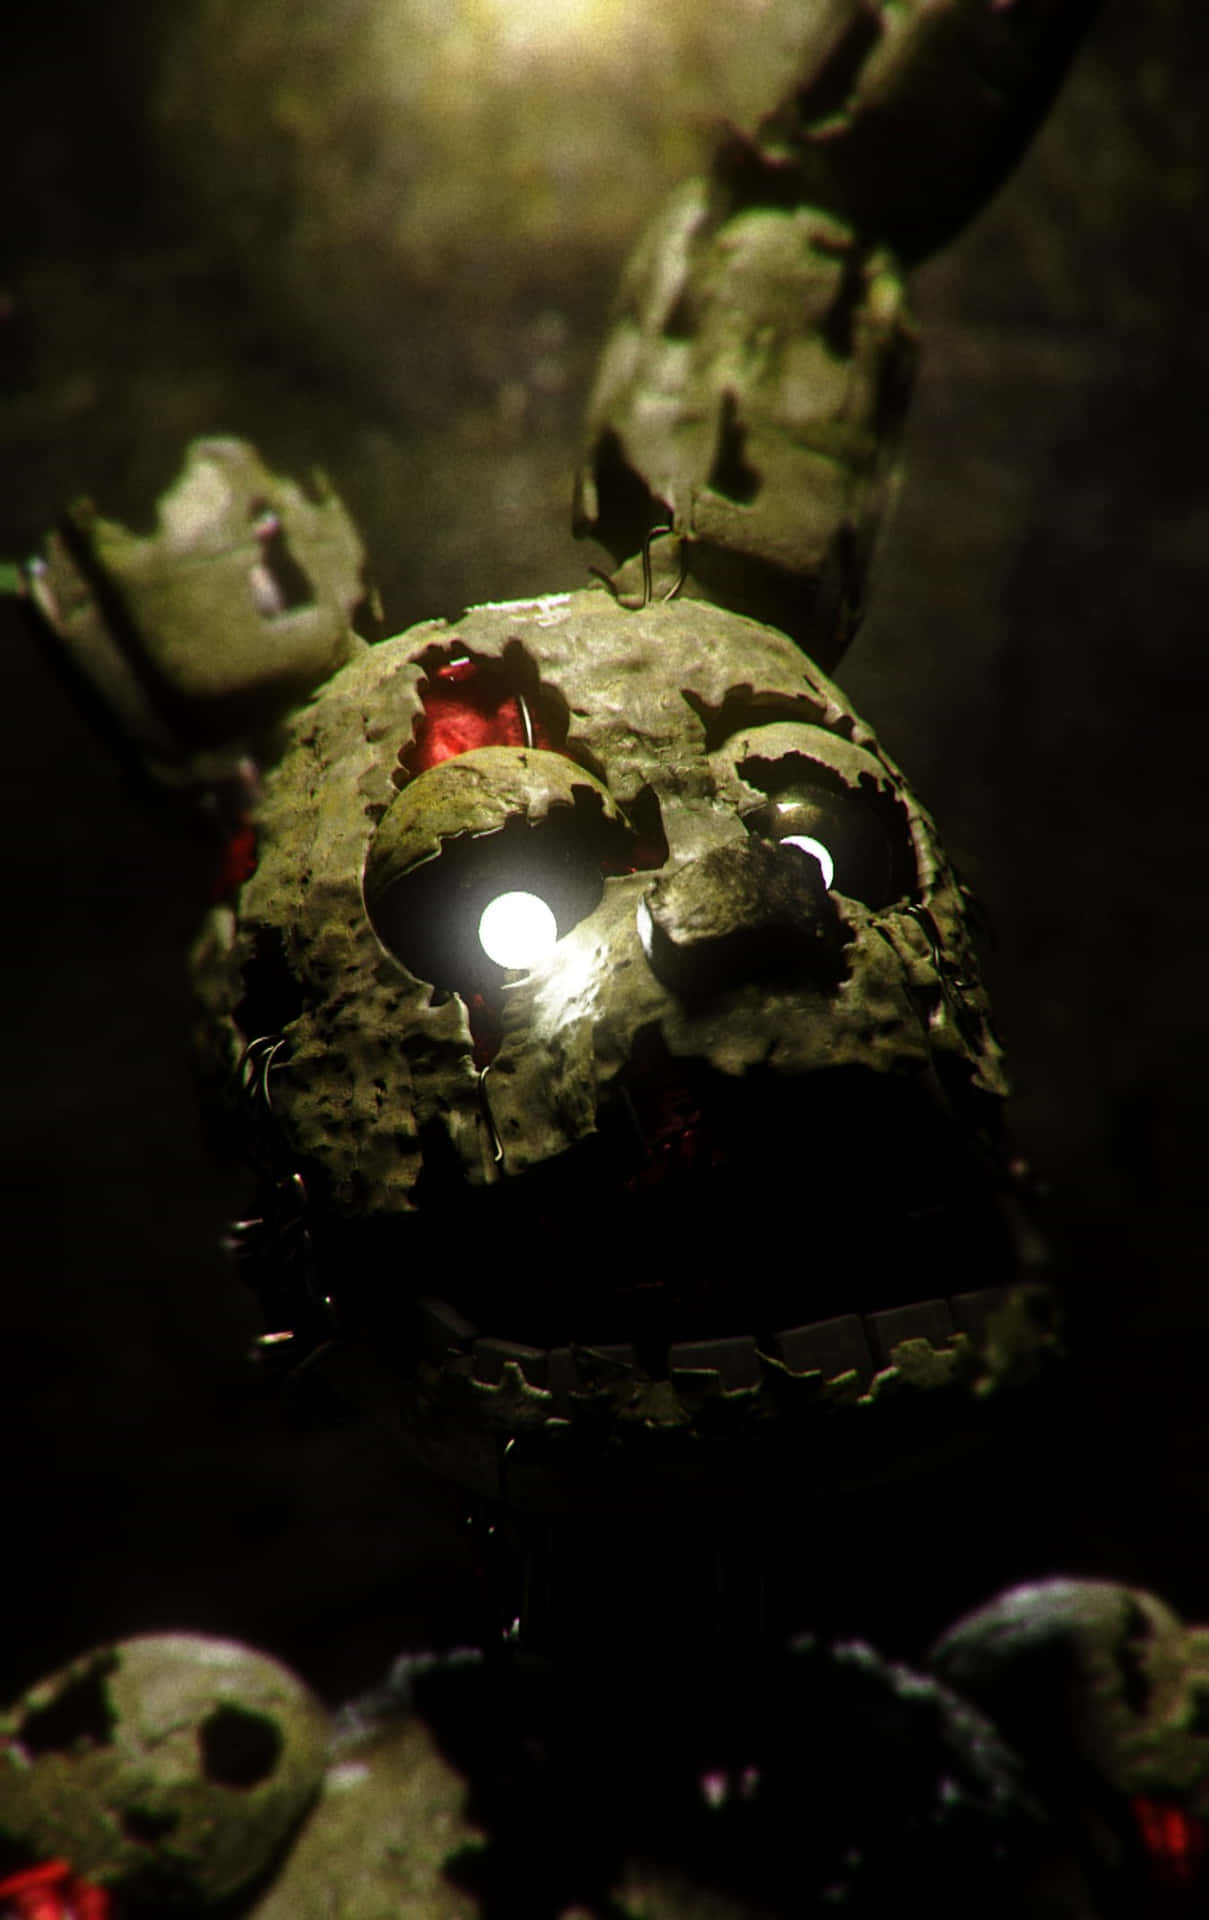 Spring trap HD wallpapers  Pxfuel